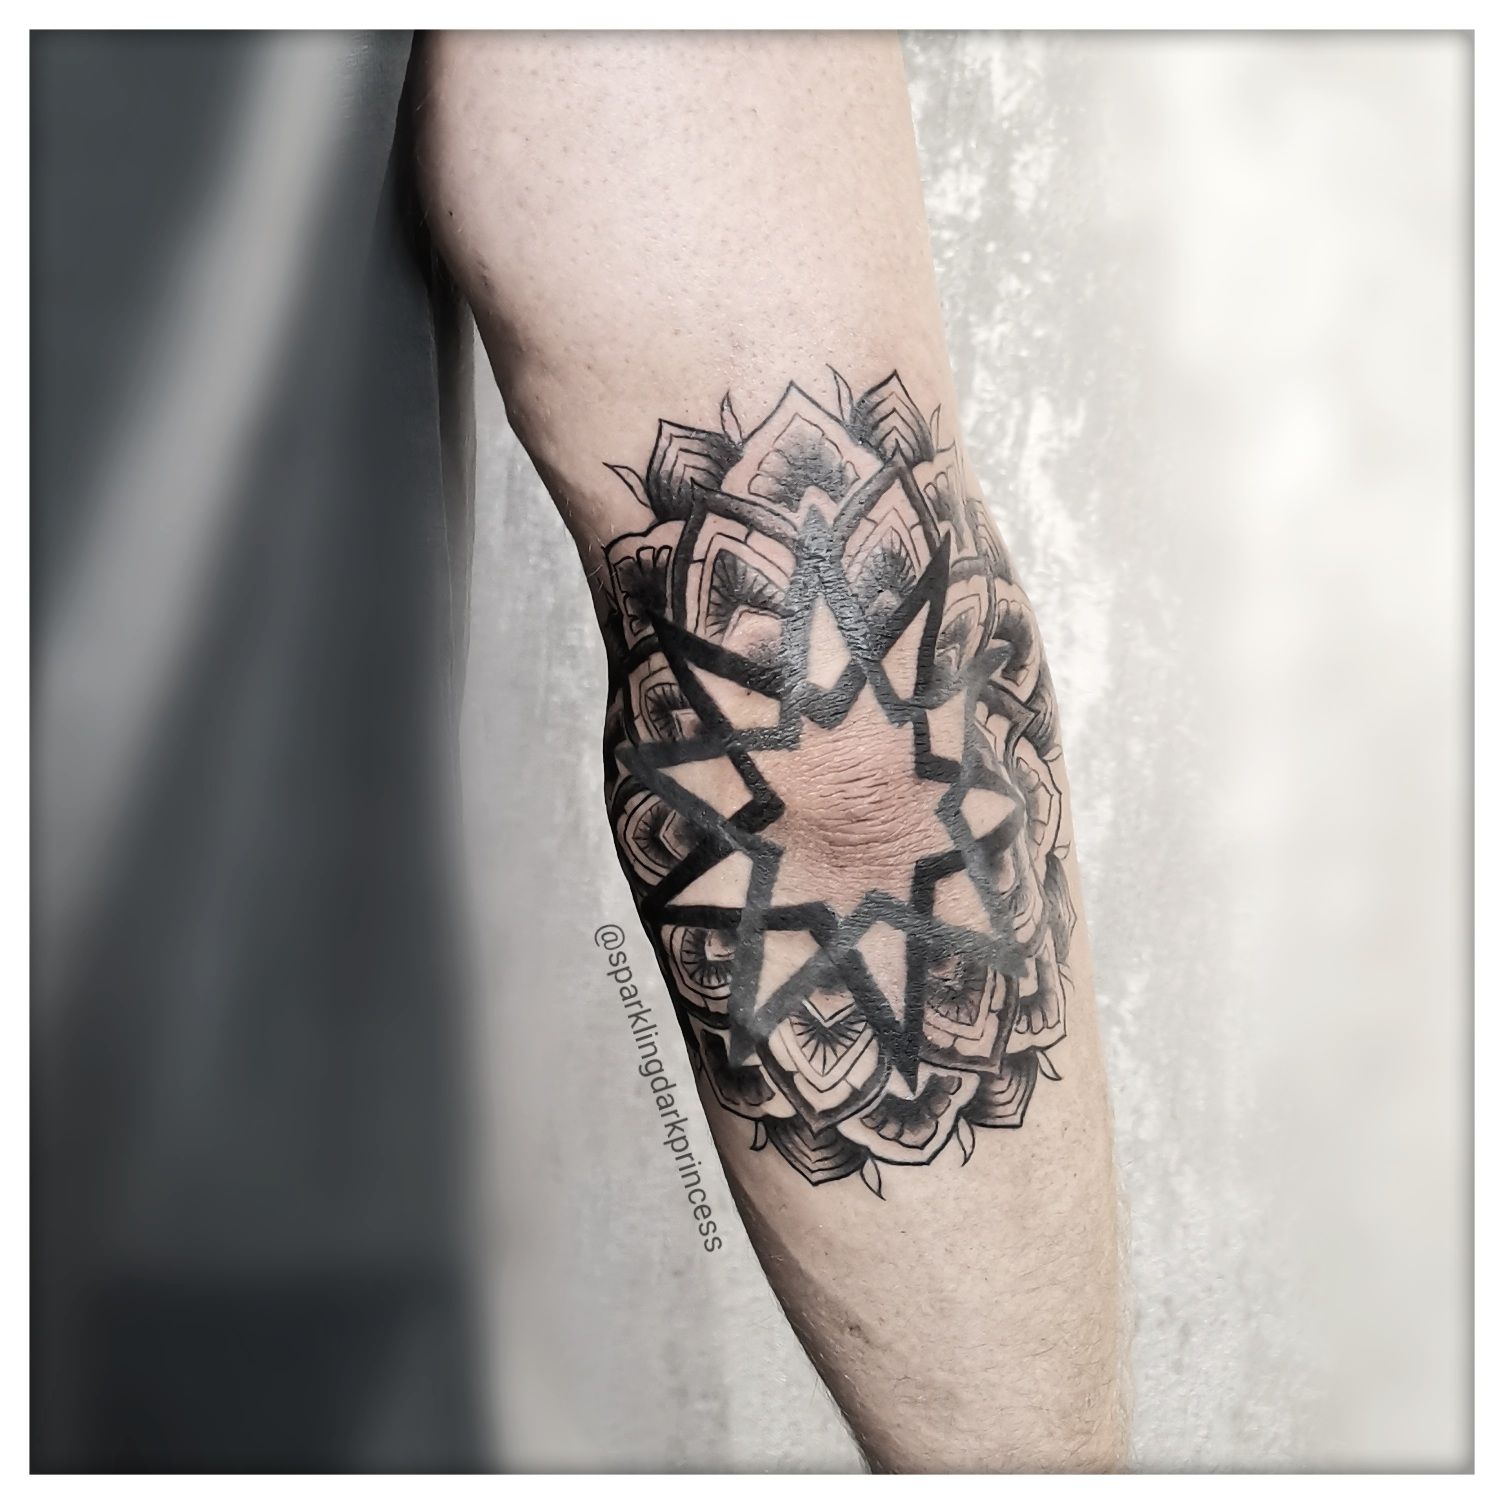 Tattooed Elbow Hide Male Face Dark Background. Visual Culture Concept.  Tattoo Can Function As Sign of Commitment Stock Photo - Image of manliness,  attribute: 129514522